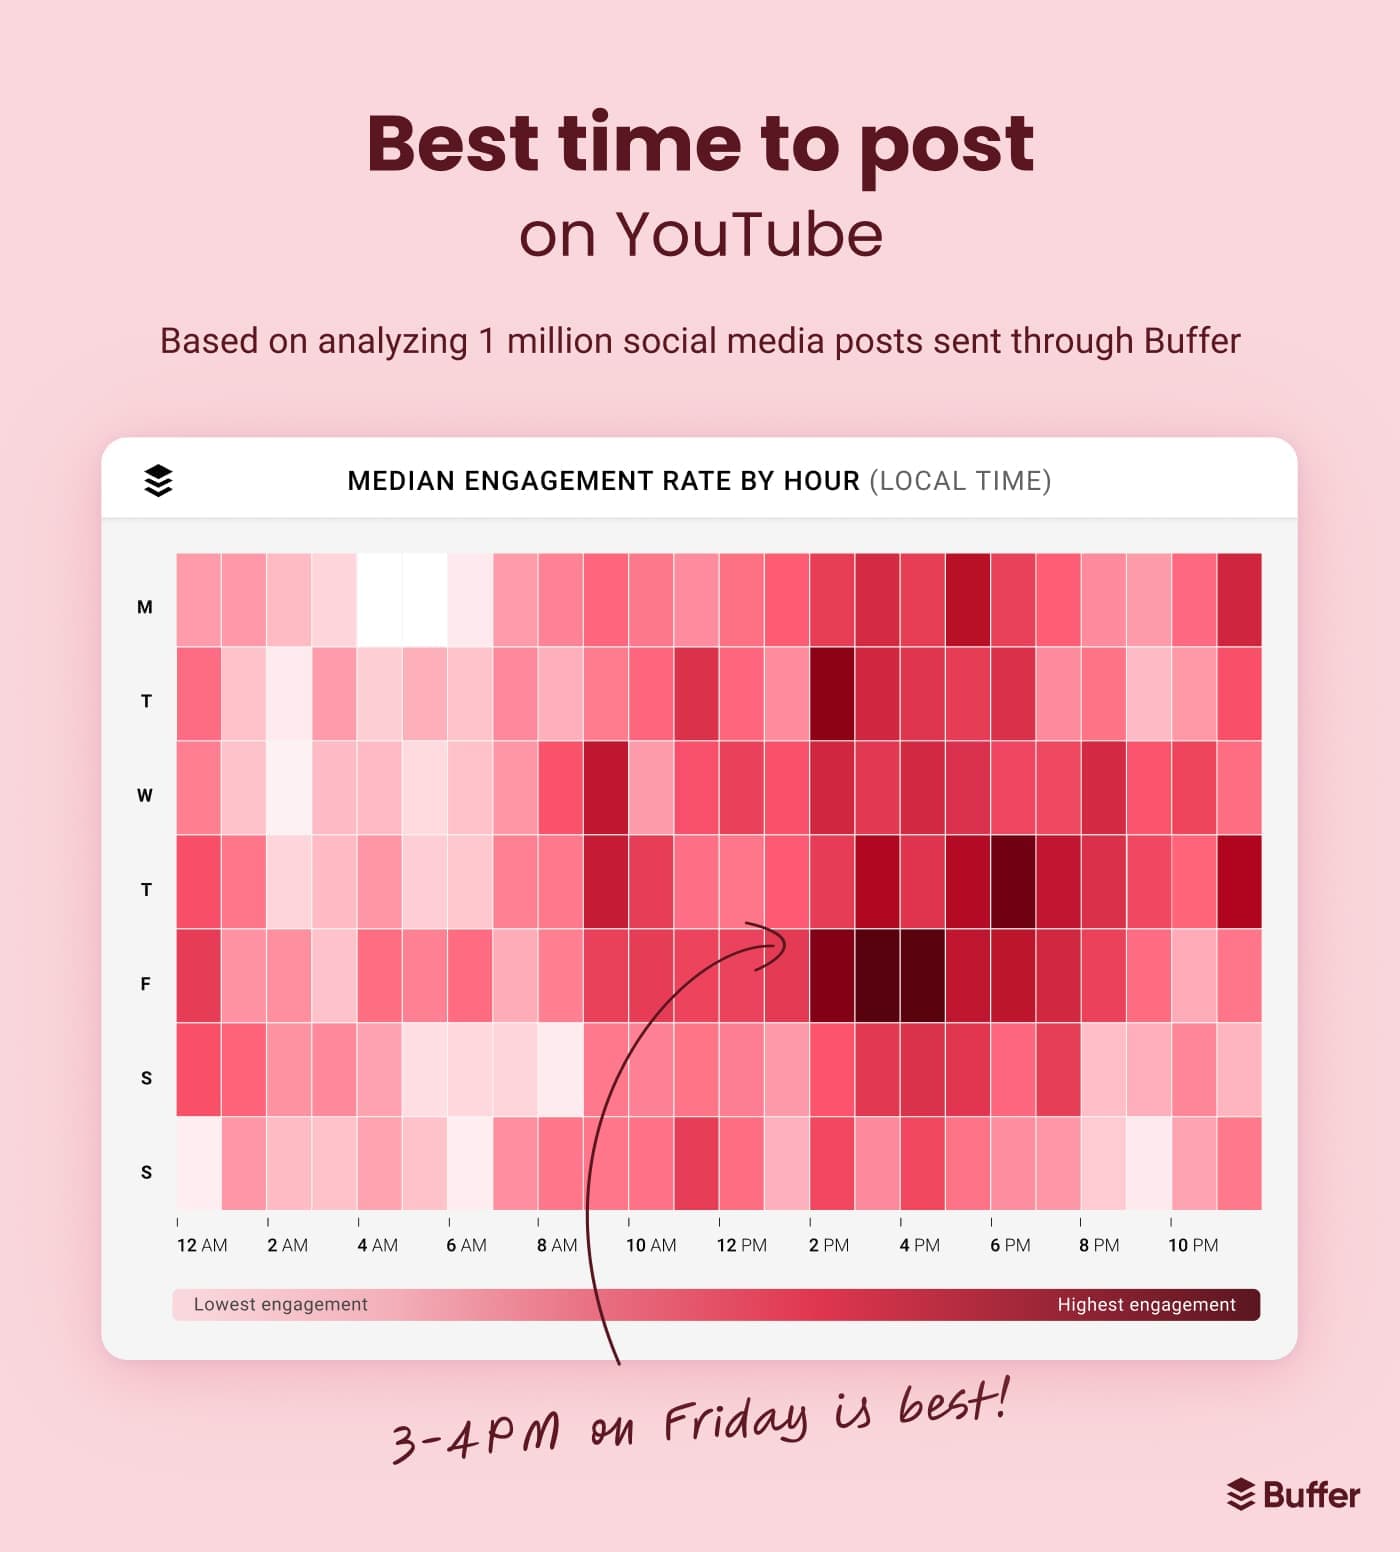 Heatmap charting the best time to post on YouTube based on analyzing 1 million social media posts sent through Buffer. 3pm to 4pm on Friday is best, with 2pm to 6pm on most other days performing well.